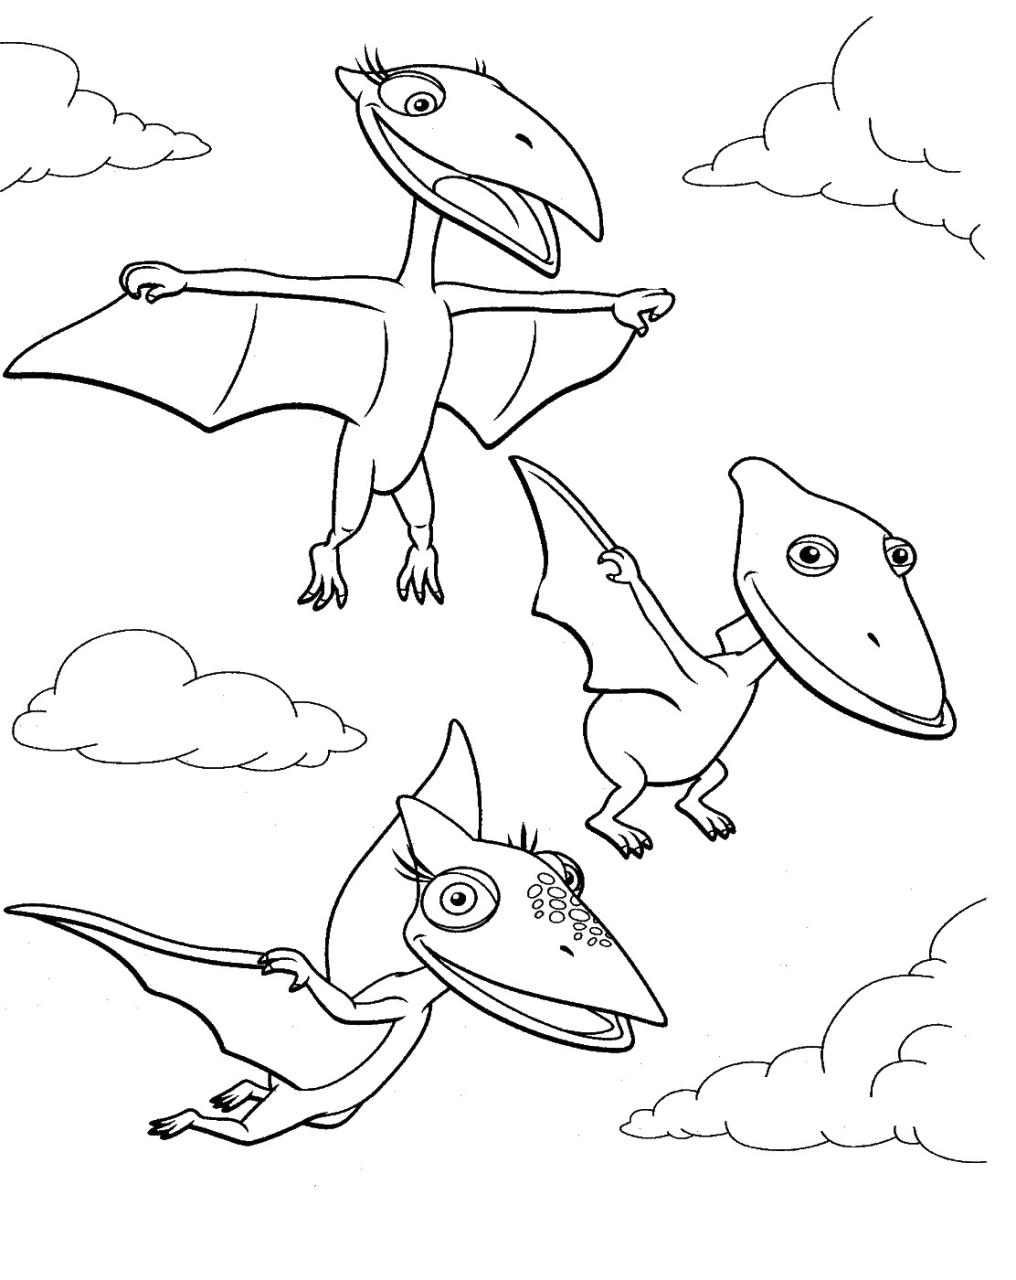 Incredible Coloring Pages Dinosaur Train Ideas